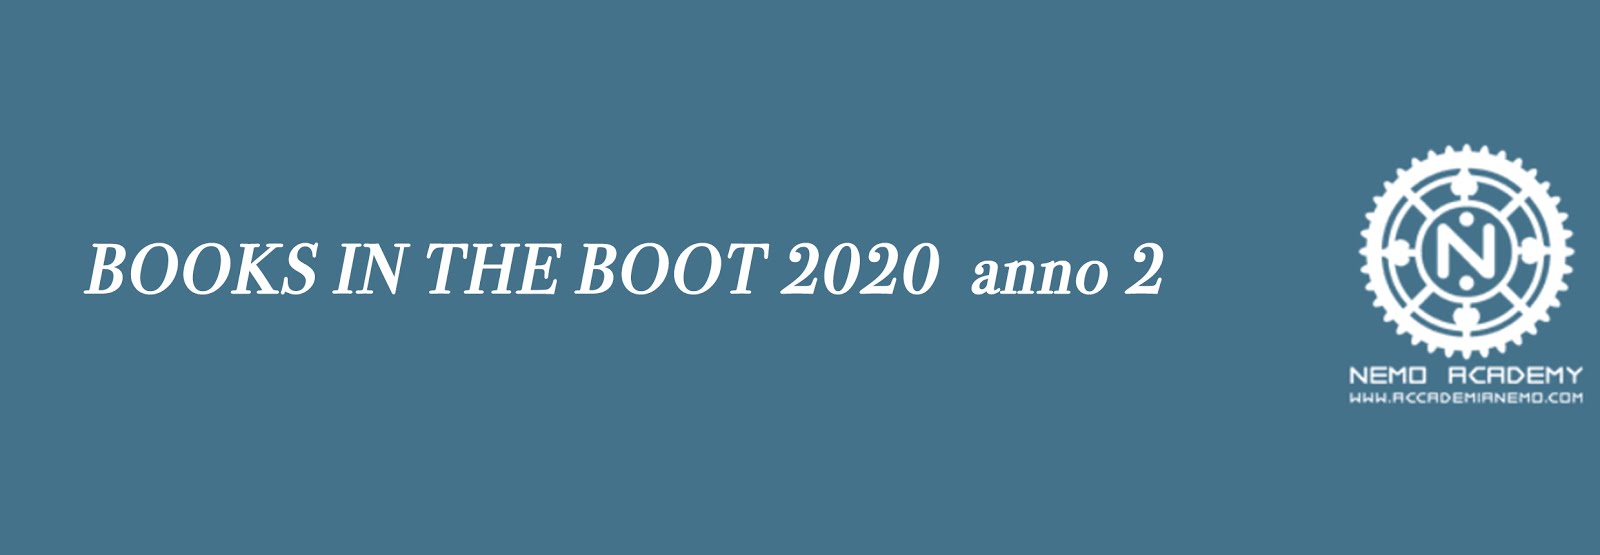 BOOKS IN THE BOOT 2020/21  